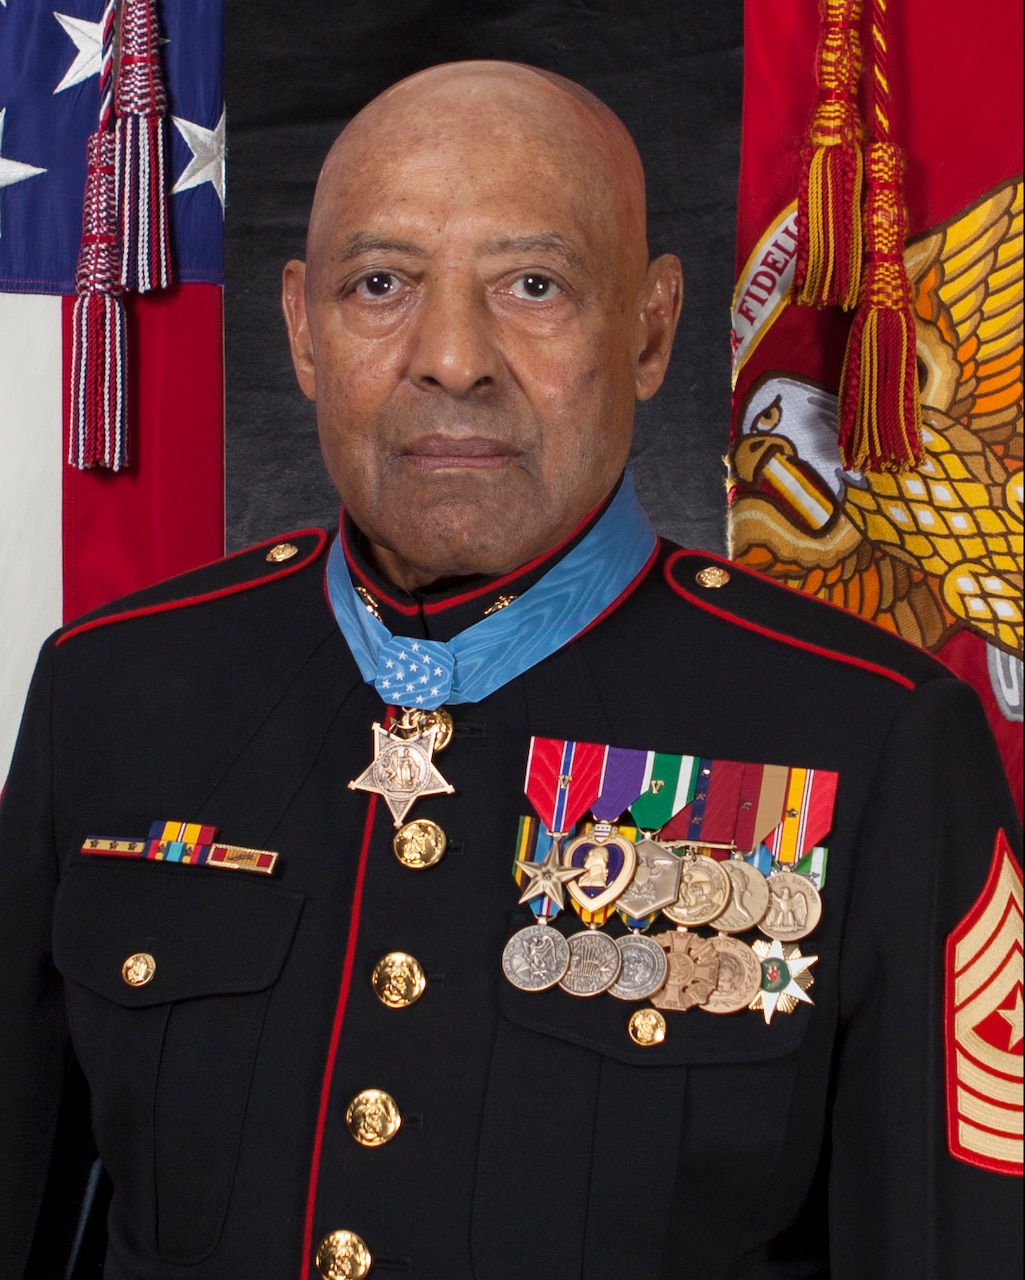 Retired U.S. Marine Corps Sgt.Maj John L. Canley, the 300th Marine Medal of Honor recipient, poses for a command board photo at the Pentagon in Arlington, Virginia, Oct. 18, 2018.